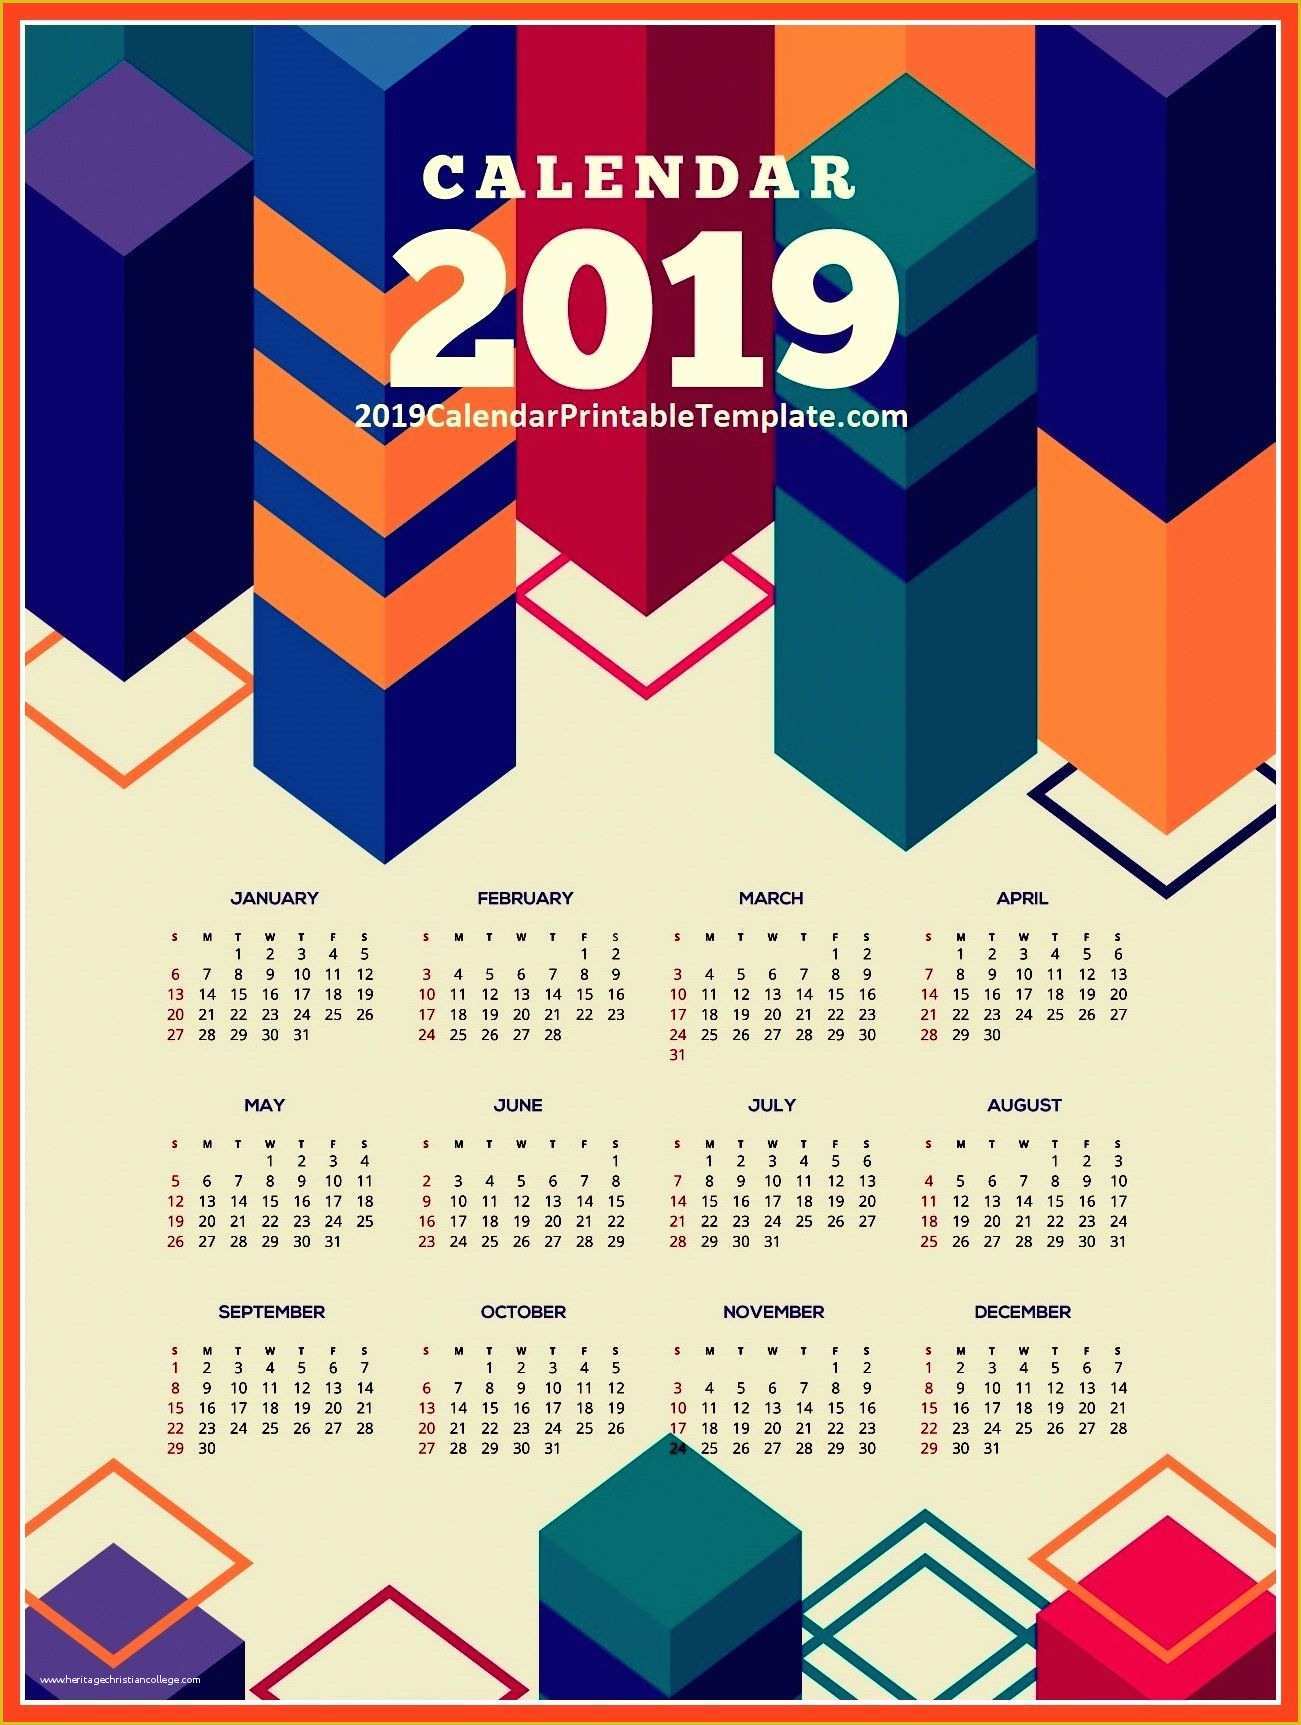 Holiday Schedule Template Free Of Pin by 2019calendarprintabletemplate On 2019 Calendar